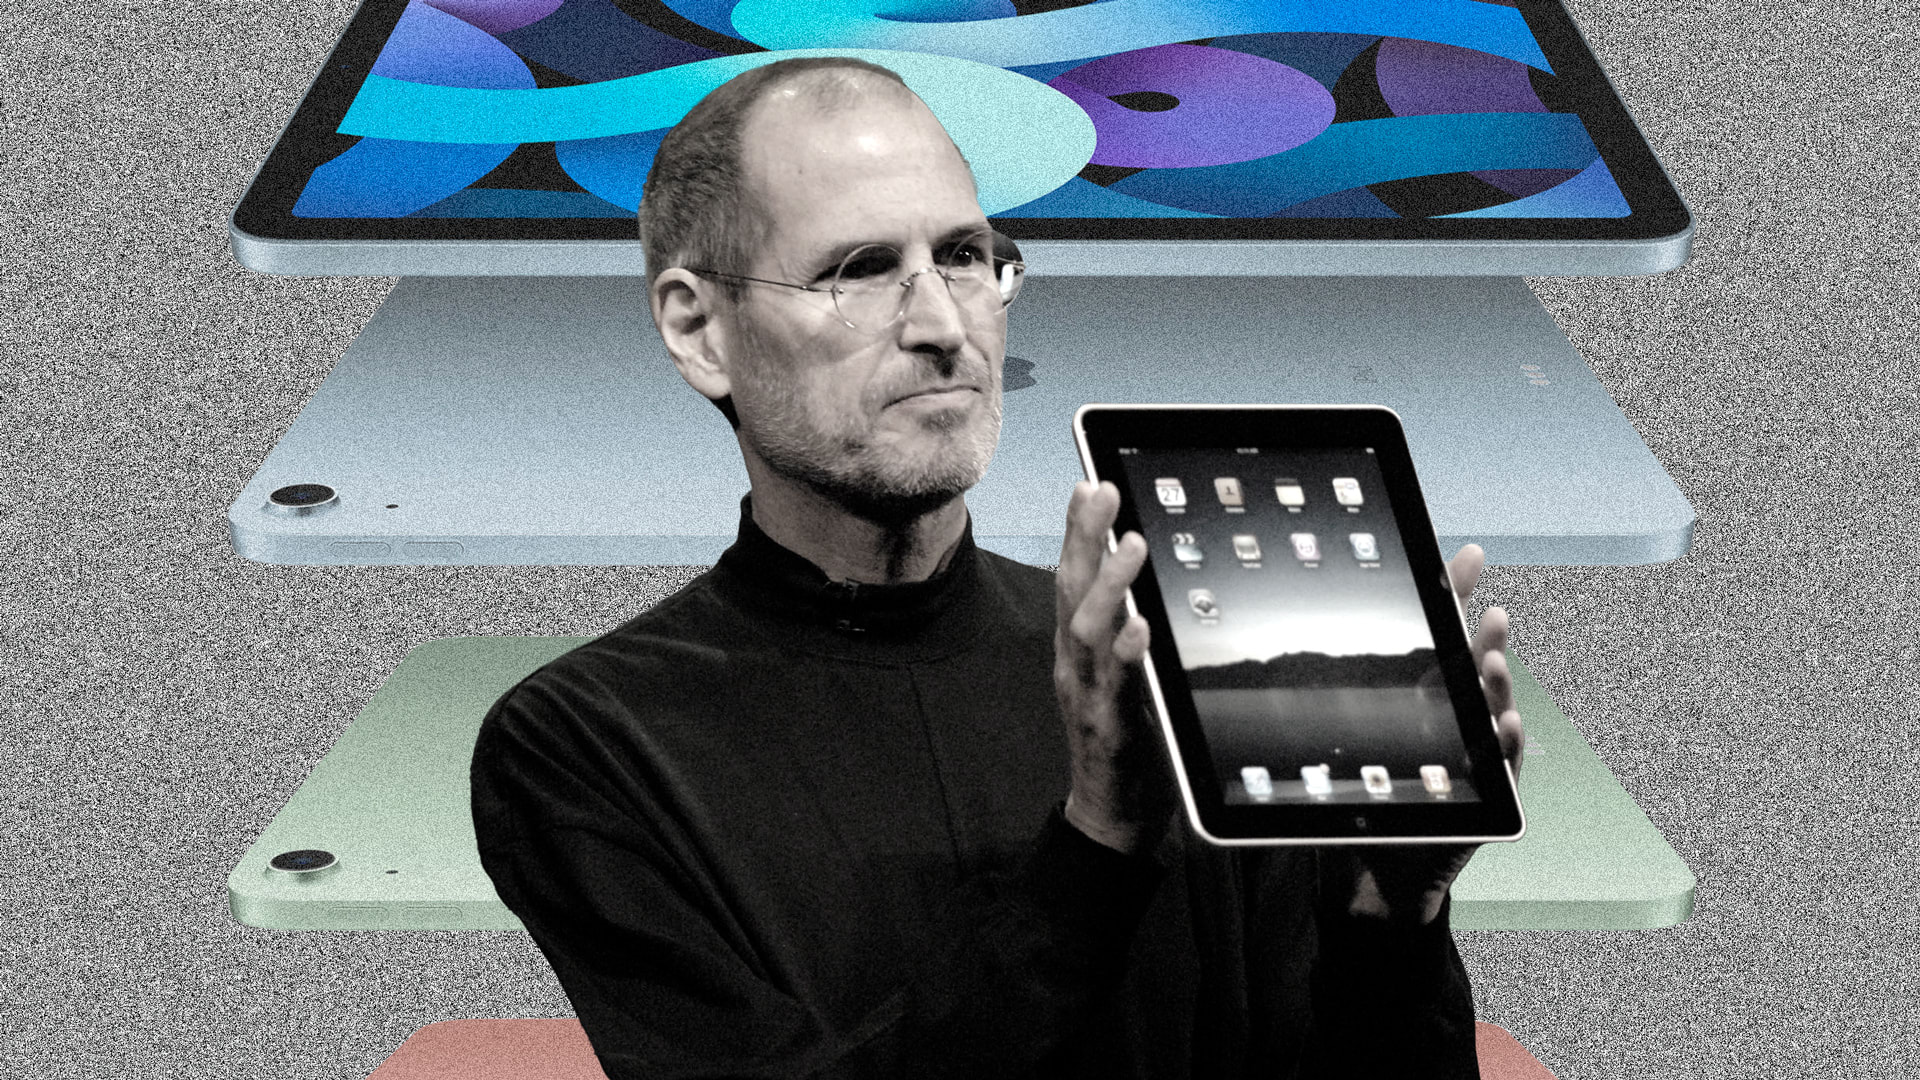 Ten years in, the iPad is still capable of surprising us—and Apple